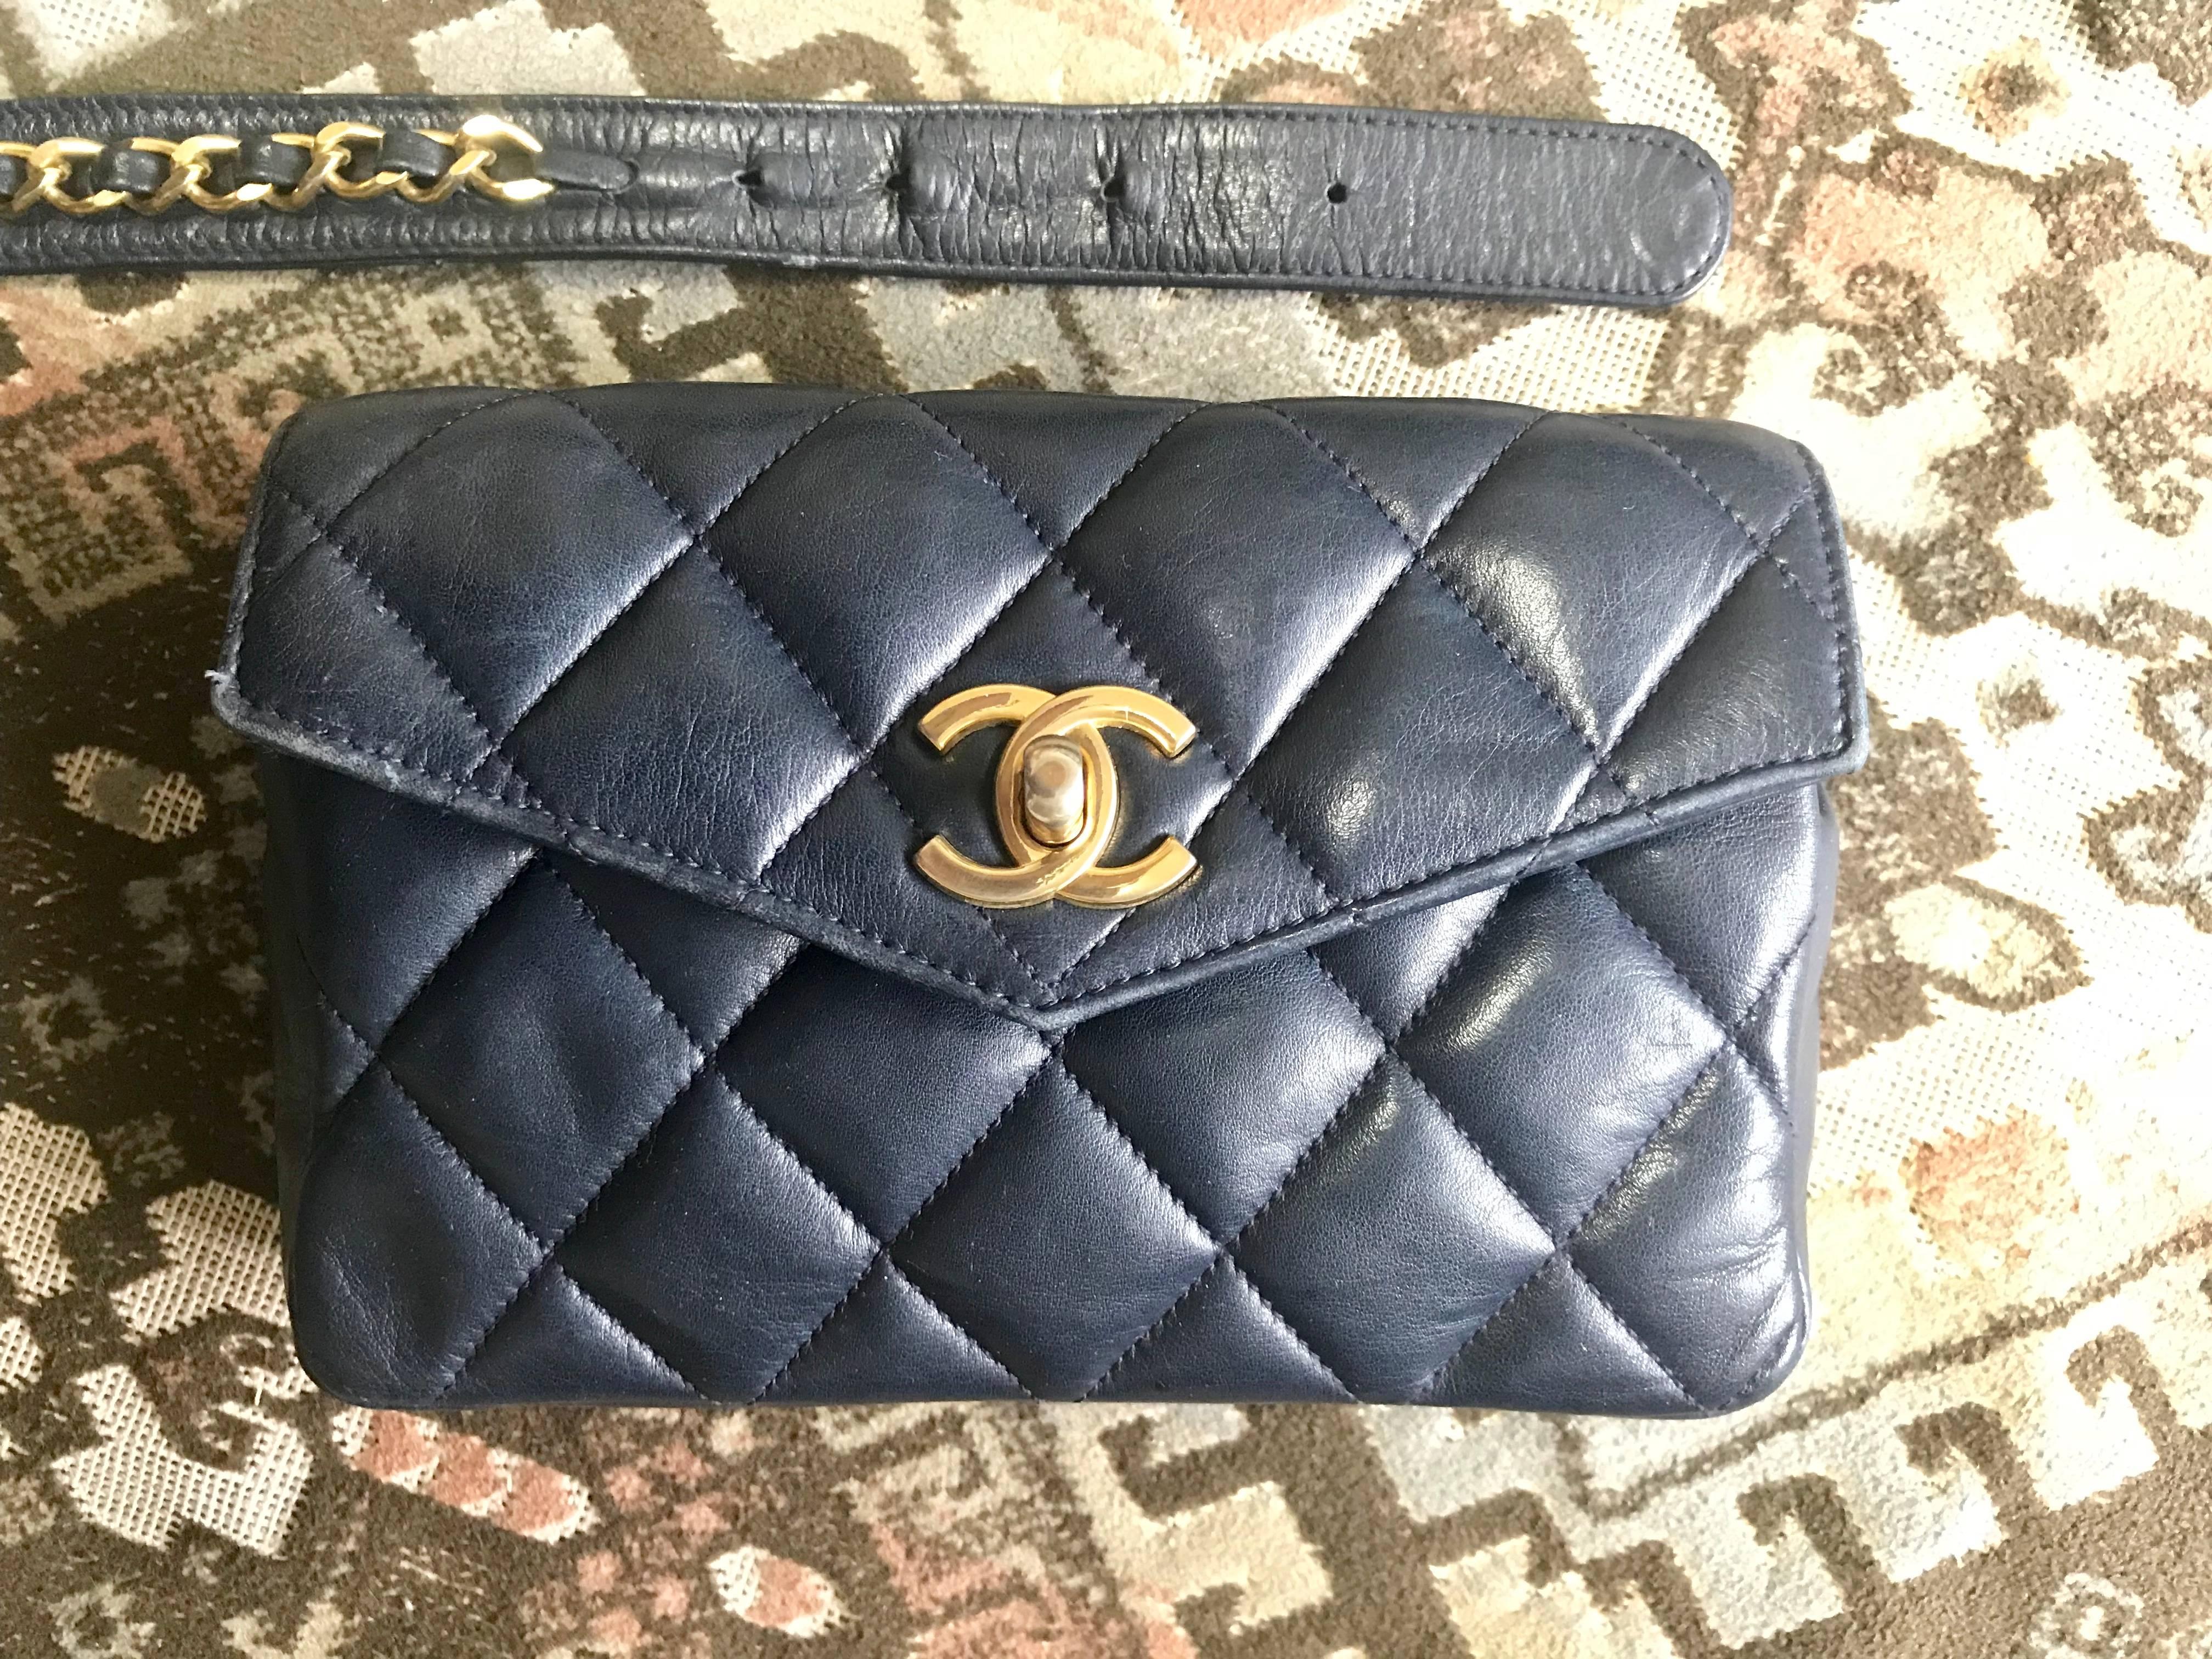 1980s. Vintage CHANEL dark navy lamb leather waist bag, fanny pack with golden chain belt & CC closure. Belt size good for 25.2